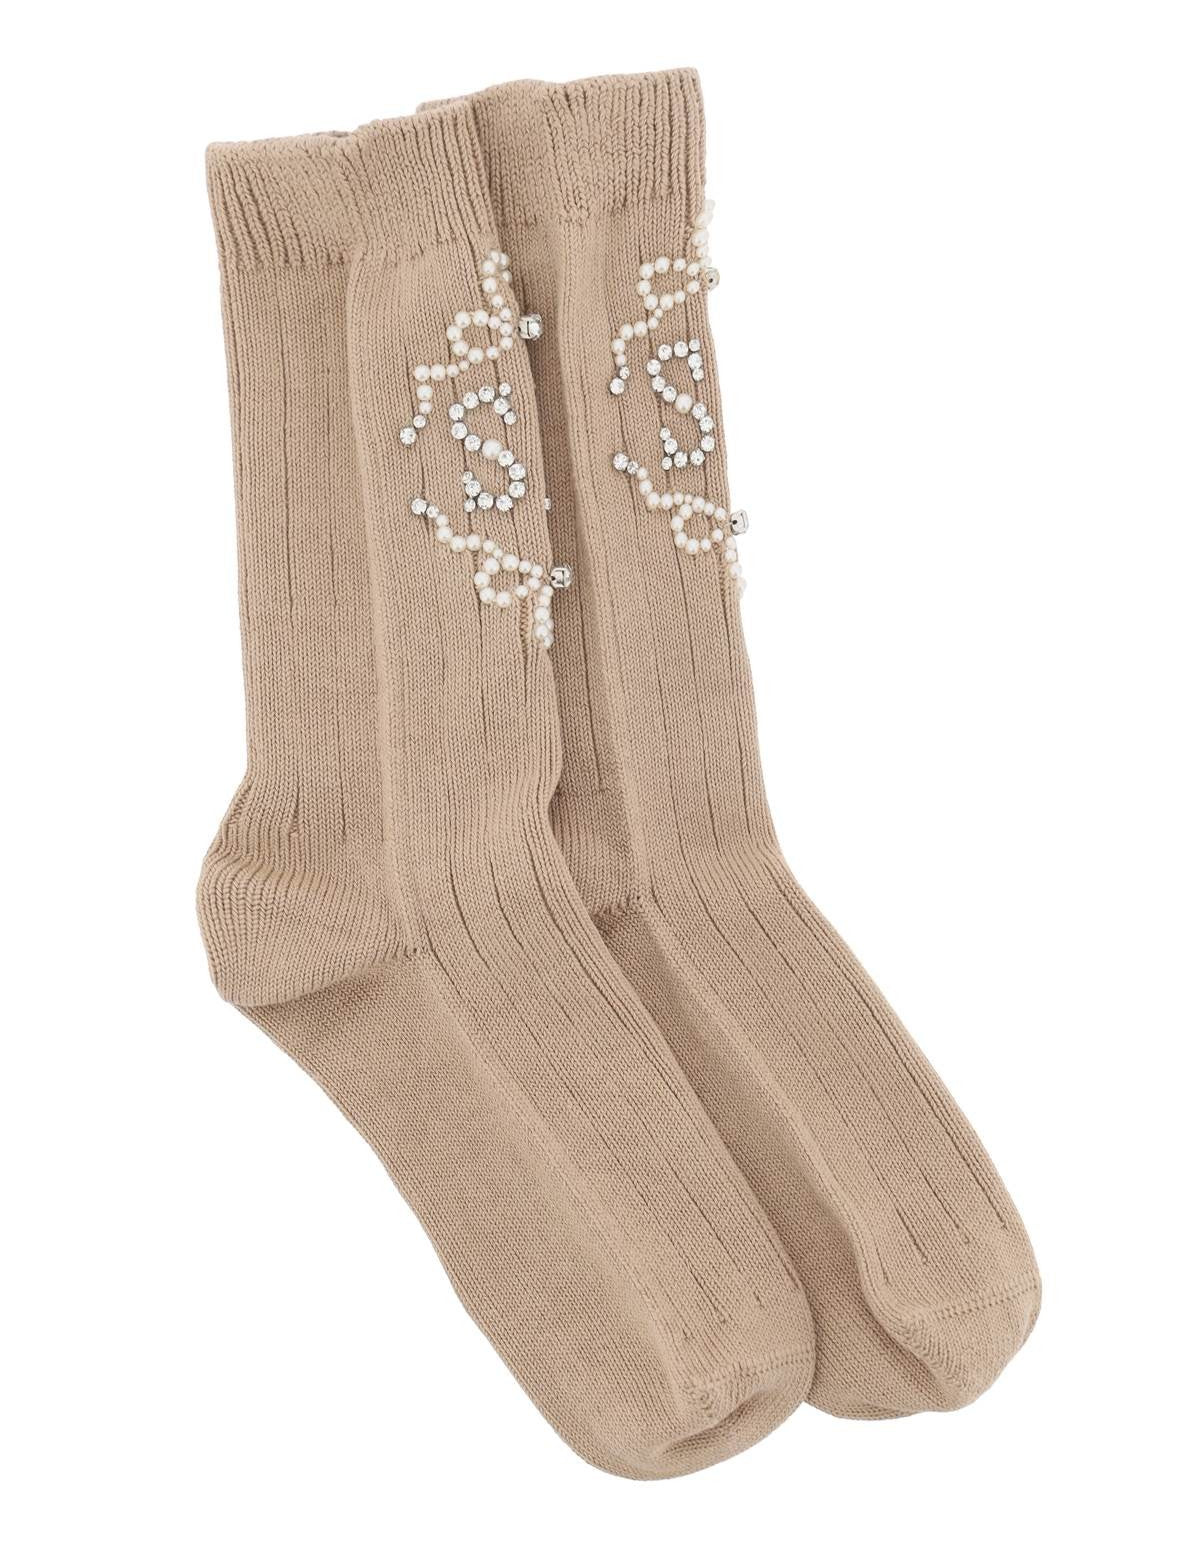 simone-rocha-sr-socks-with-pearls-and-crystals_1337901f-be19-4275-949c-14a87d95fdd9.jpg